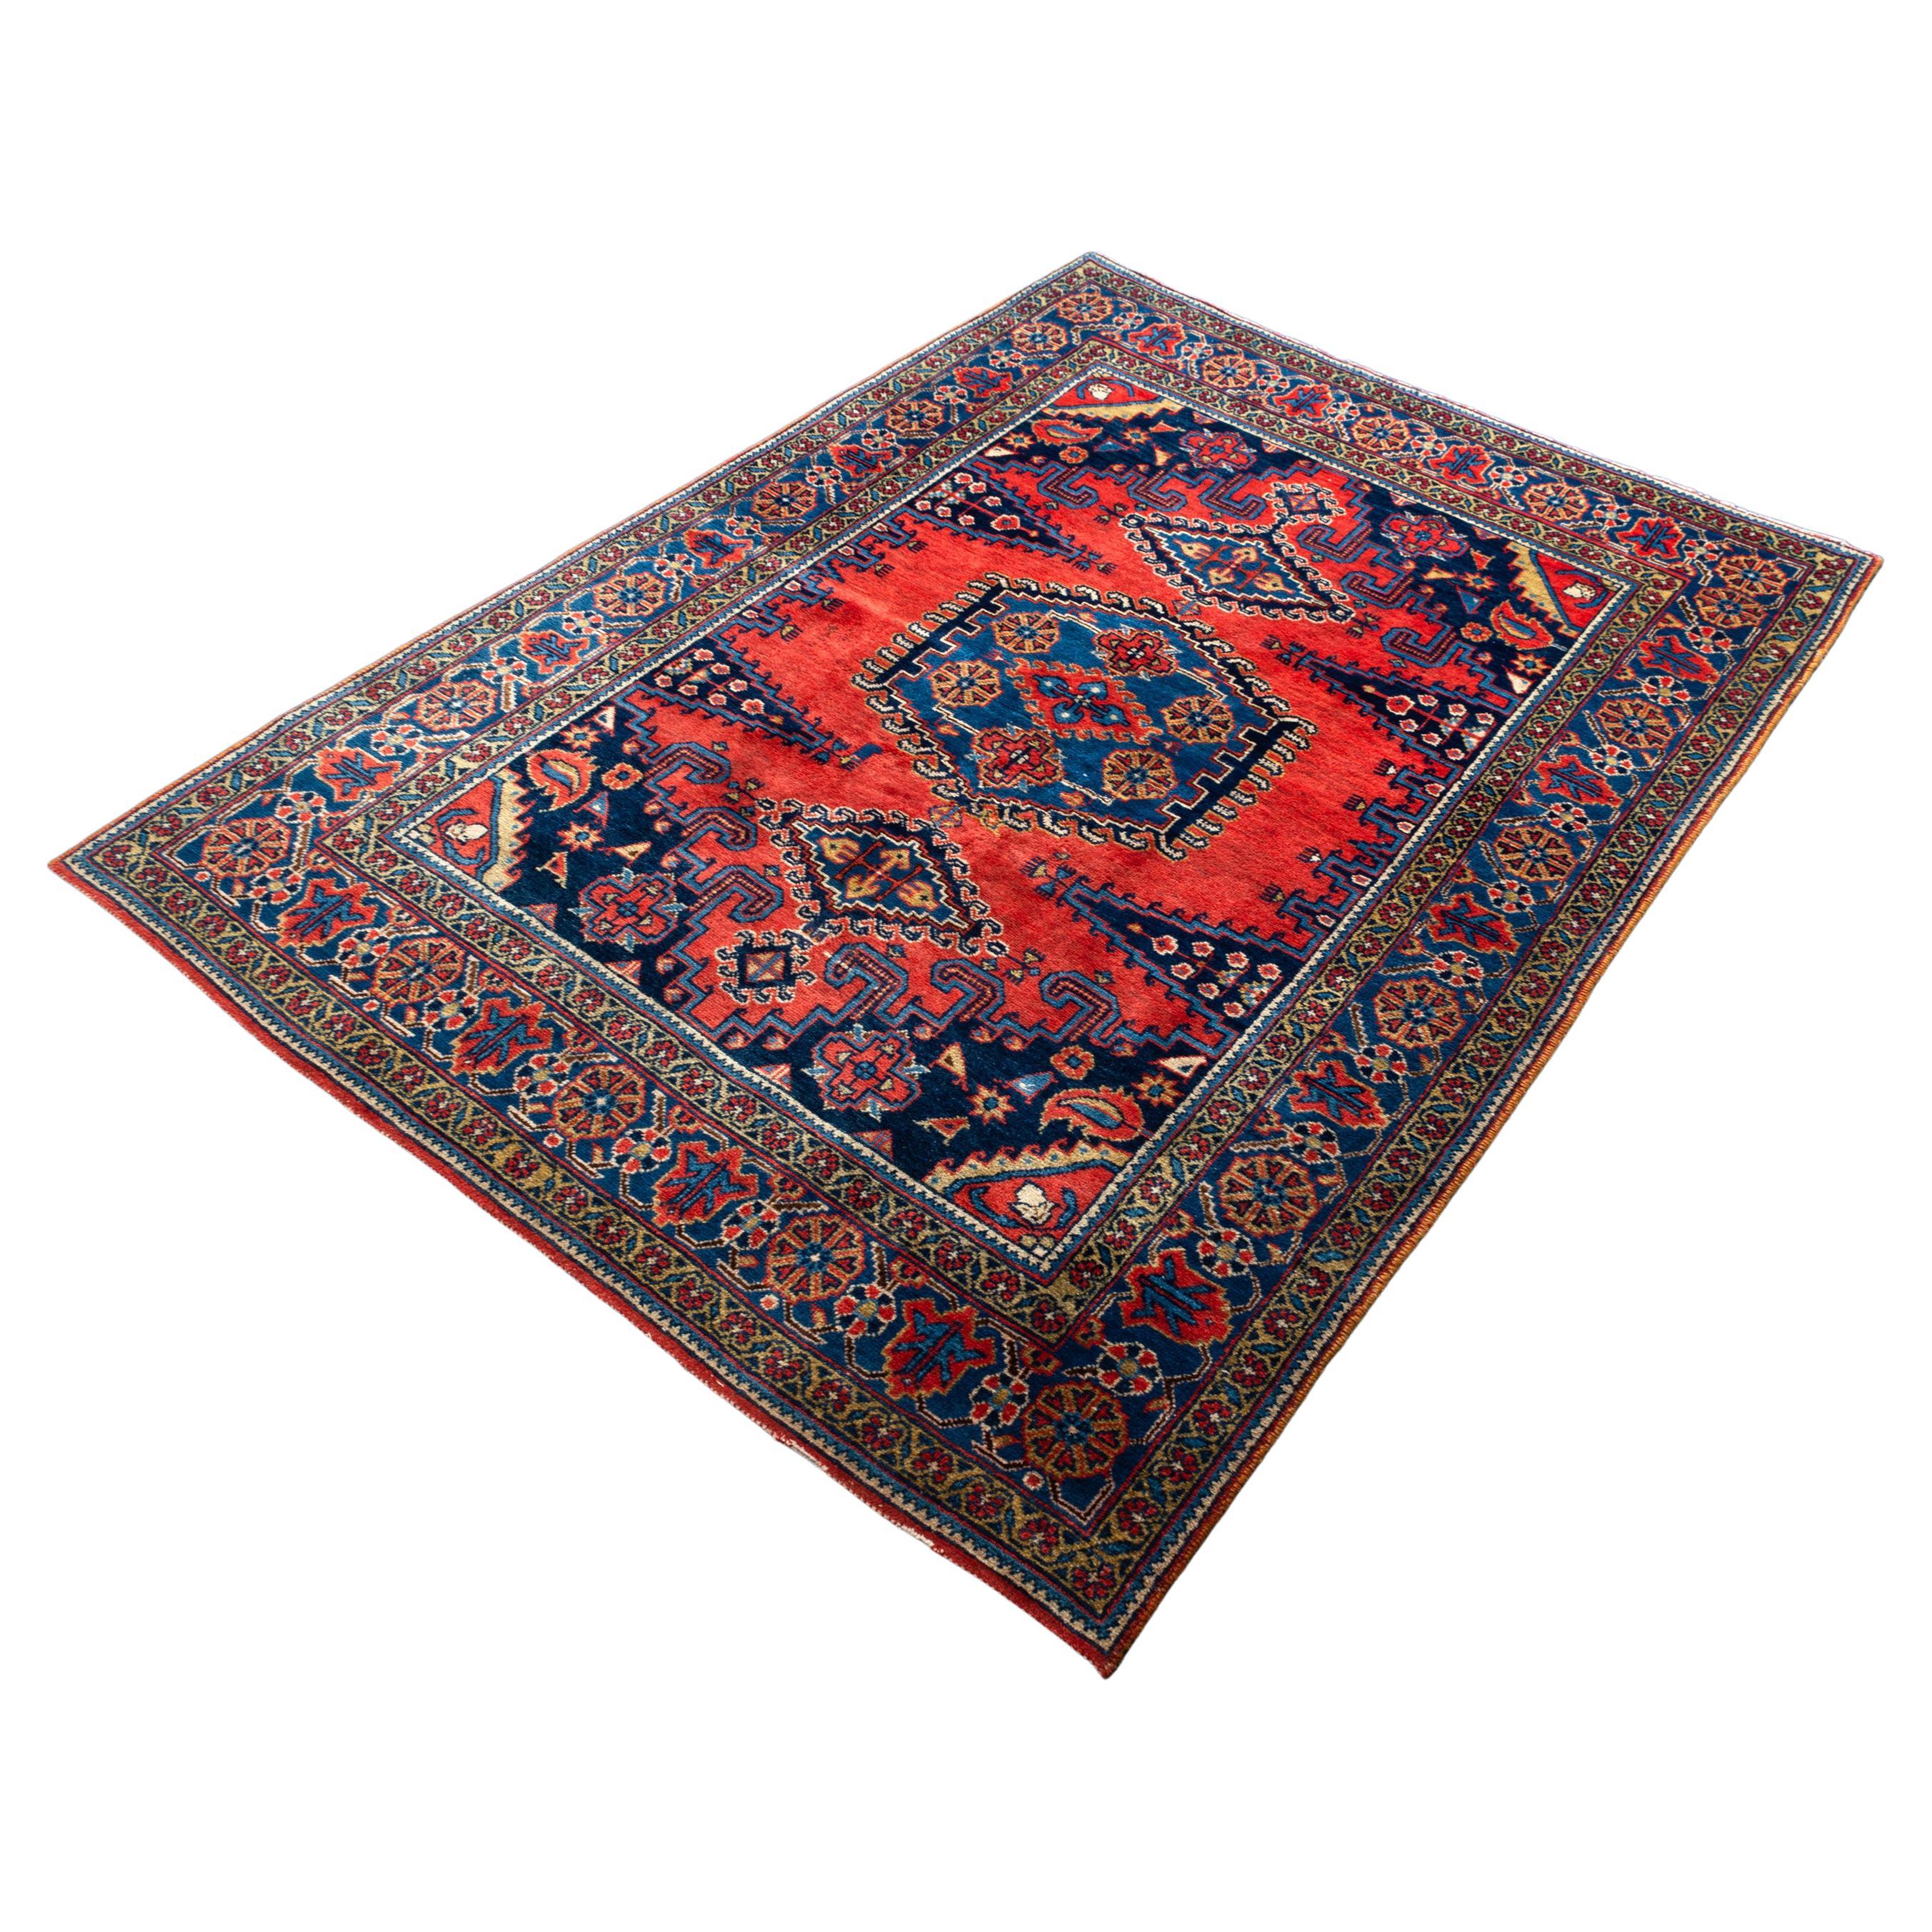 A Persian Hamadan wiss hand-knotted rug 
Geometric Central Medallion
Beautiful vibrancy of colour
Persian rug on a thick wool pile on a cotton foundation
Handmade
Mid 20th century

Measures: 161 x 229cm

In excellent condition commensurate